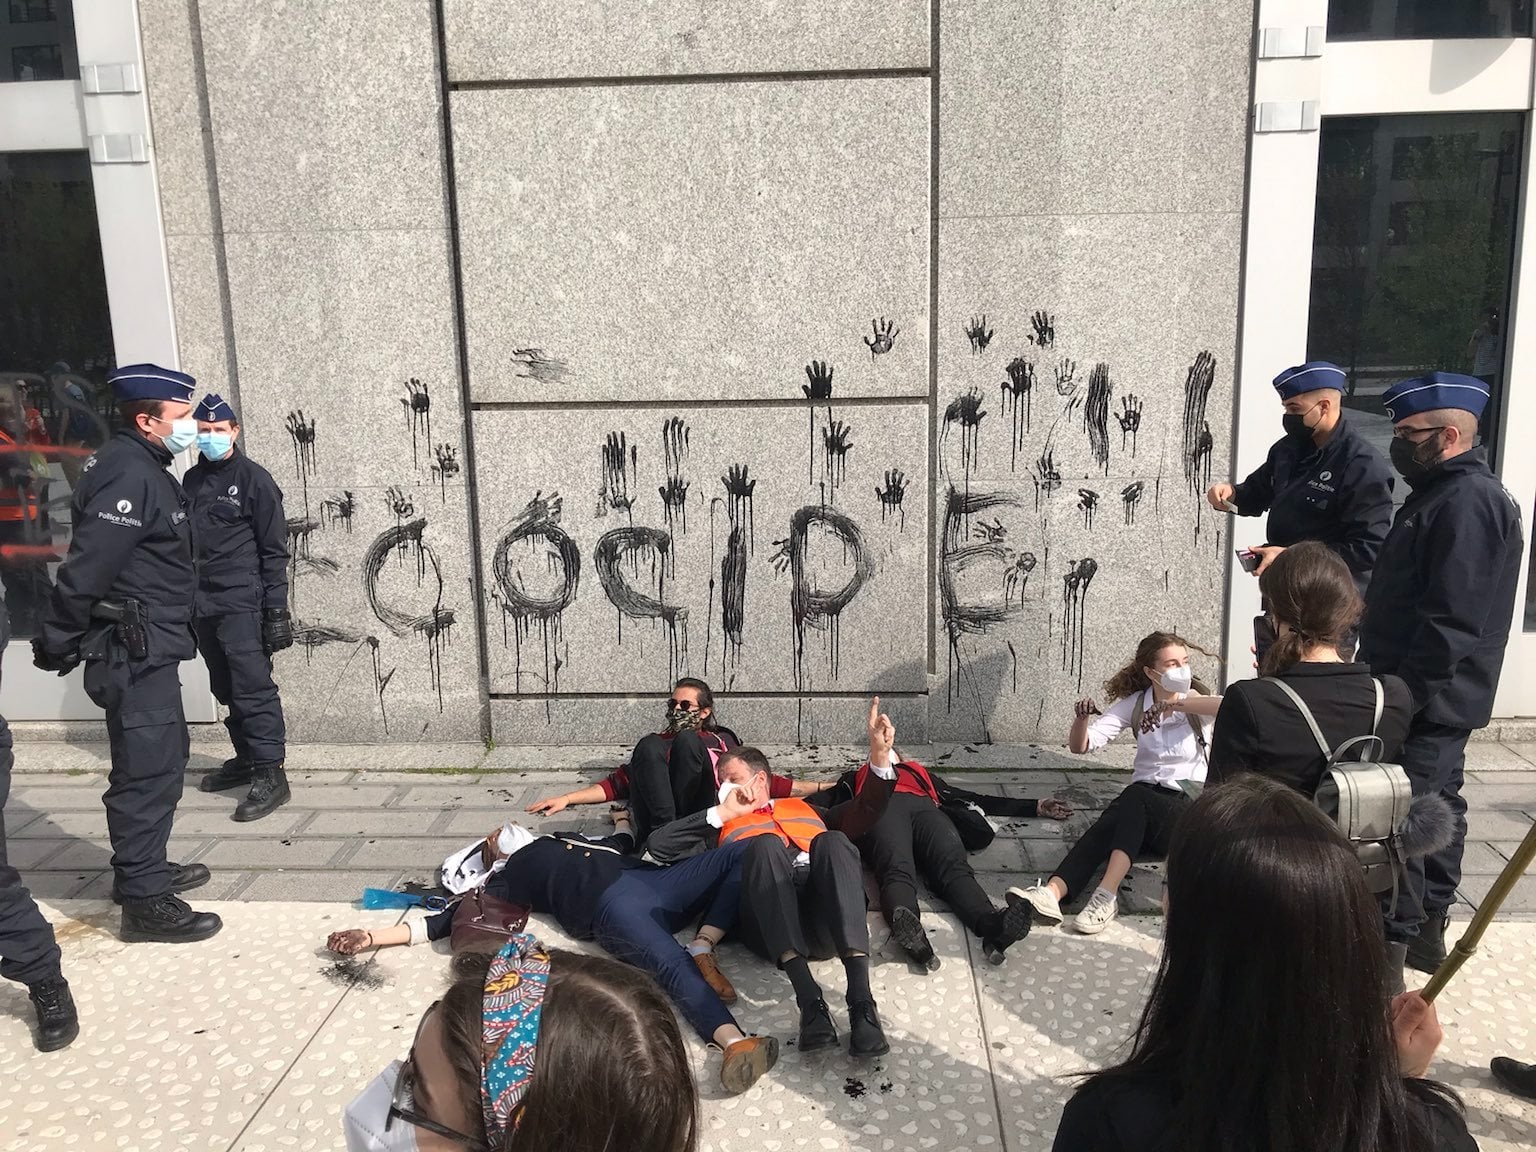 Brussels, Belgium. A number of European financial institutions were targeted with a simple message - stop funding ecocide. XR Belgium’s efforts got a lot of media coverage.